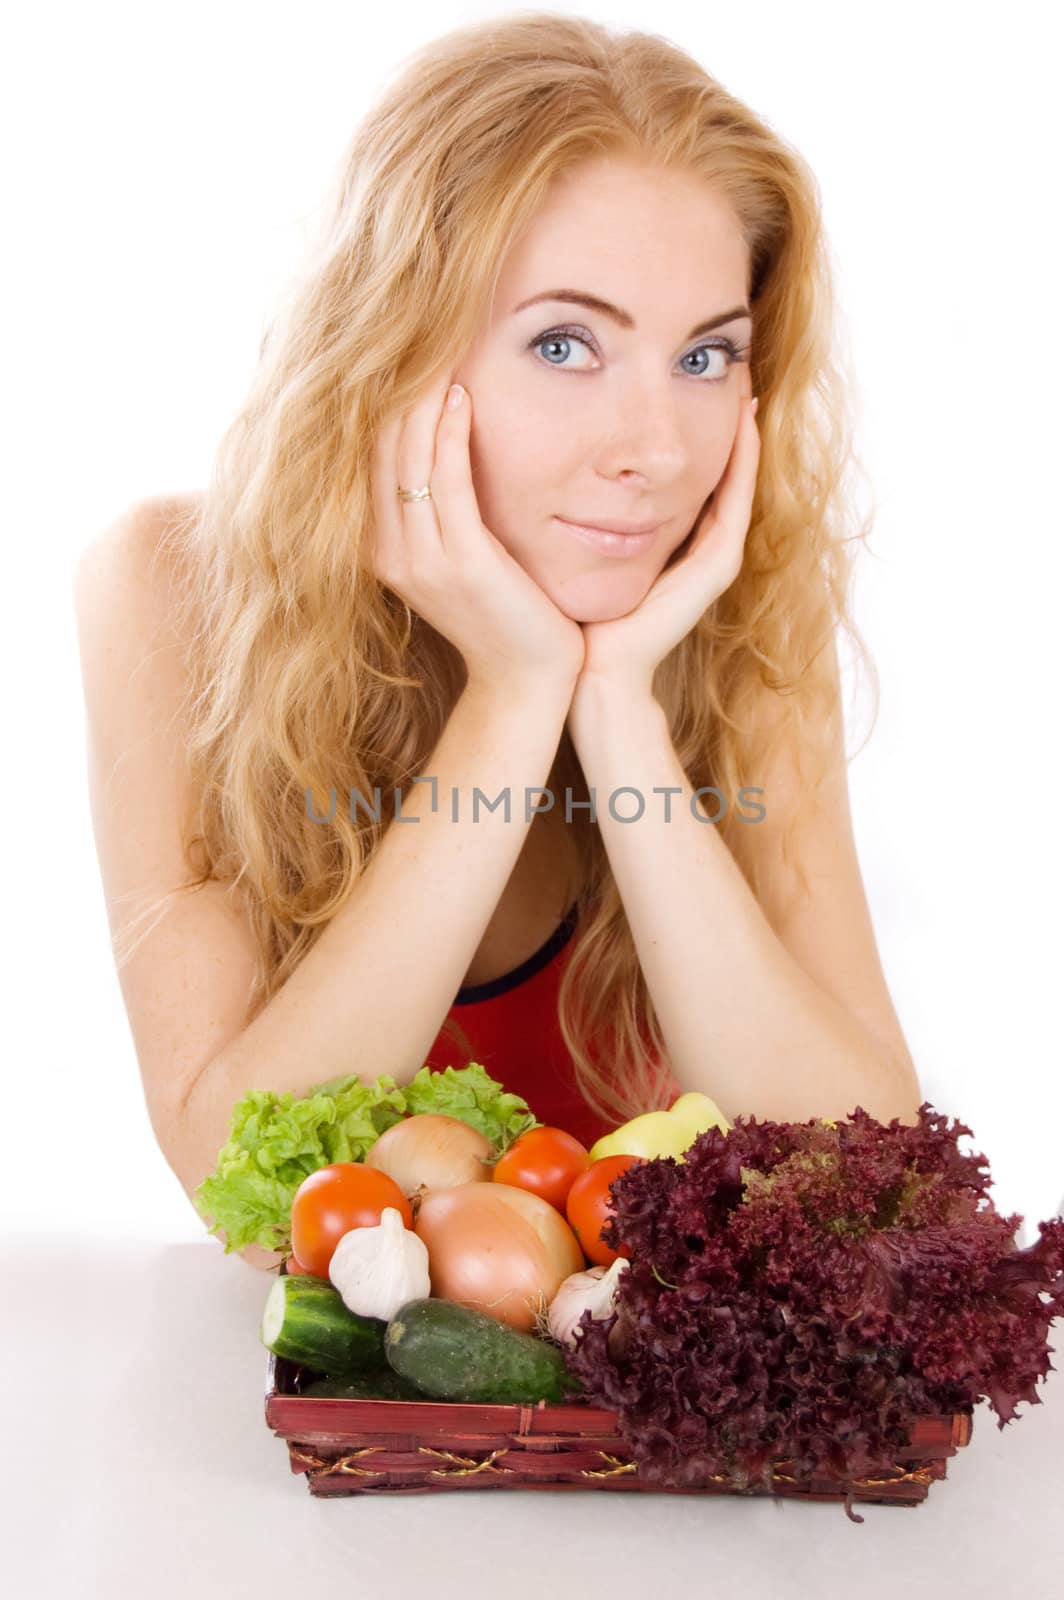 Red-headed woman with vegetables over white background